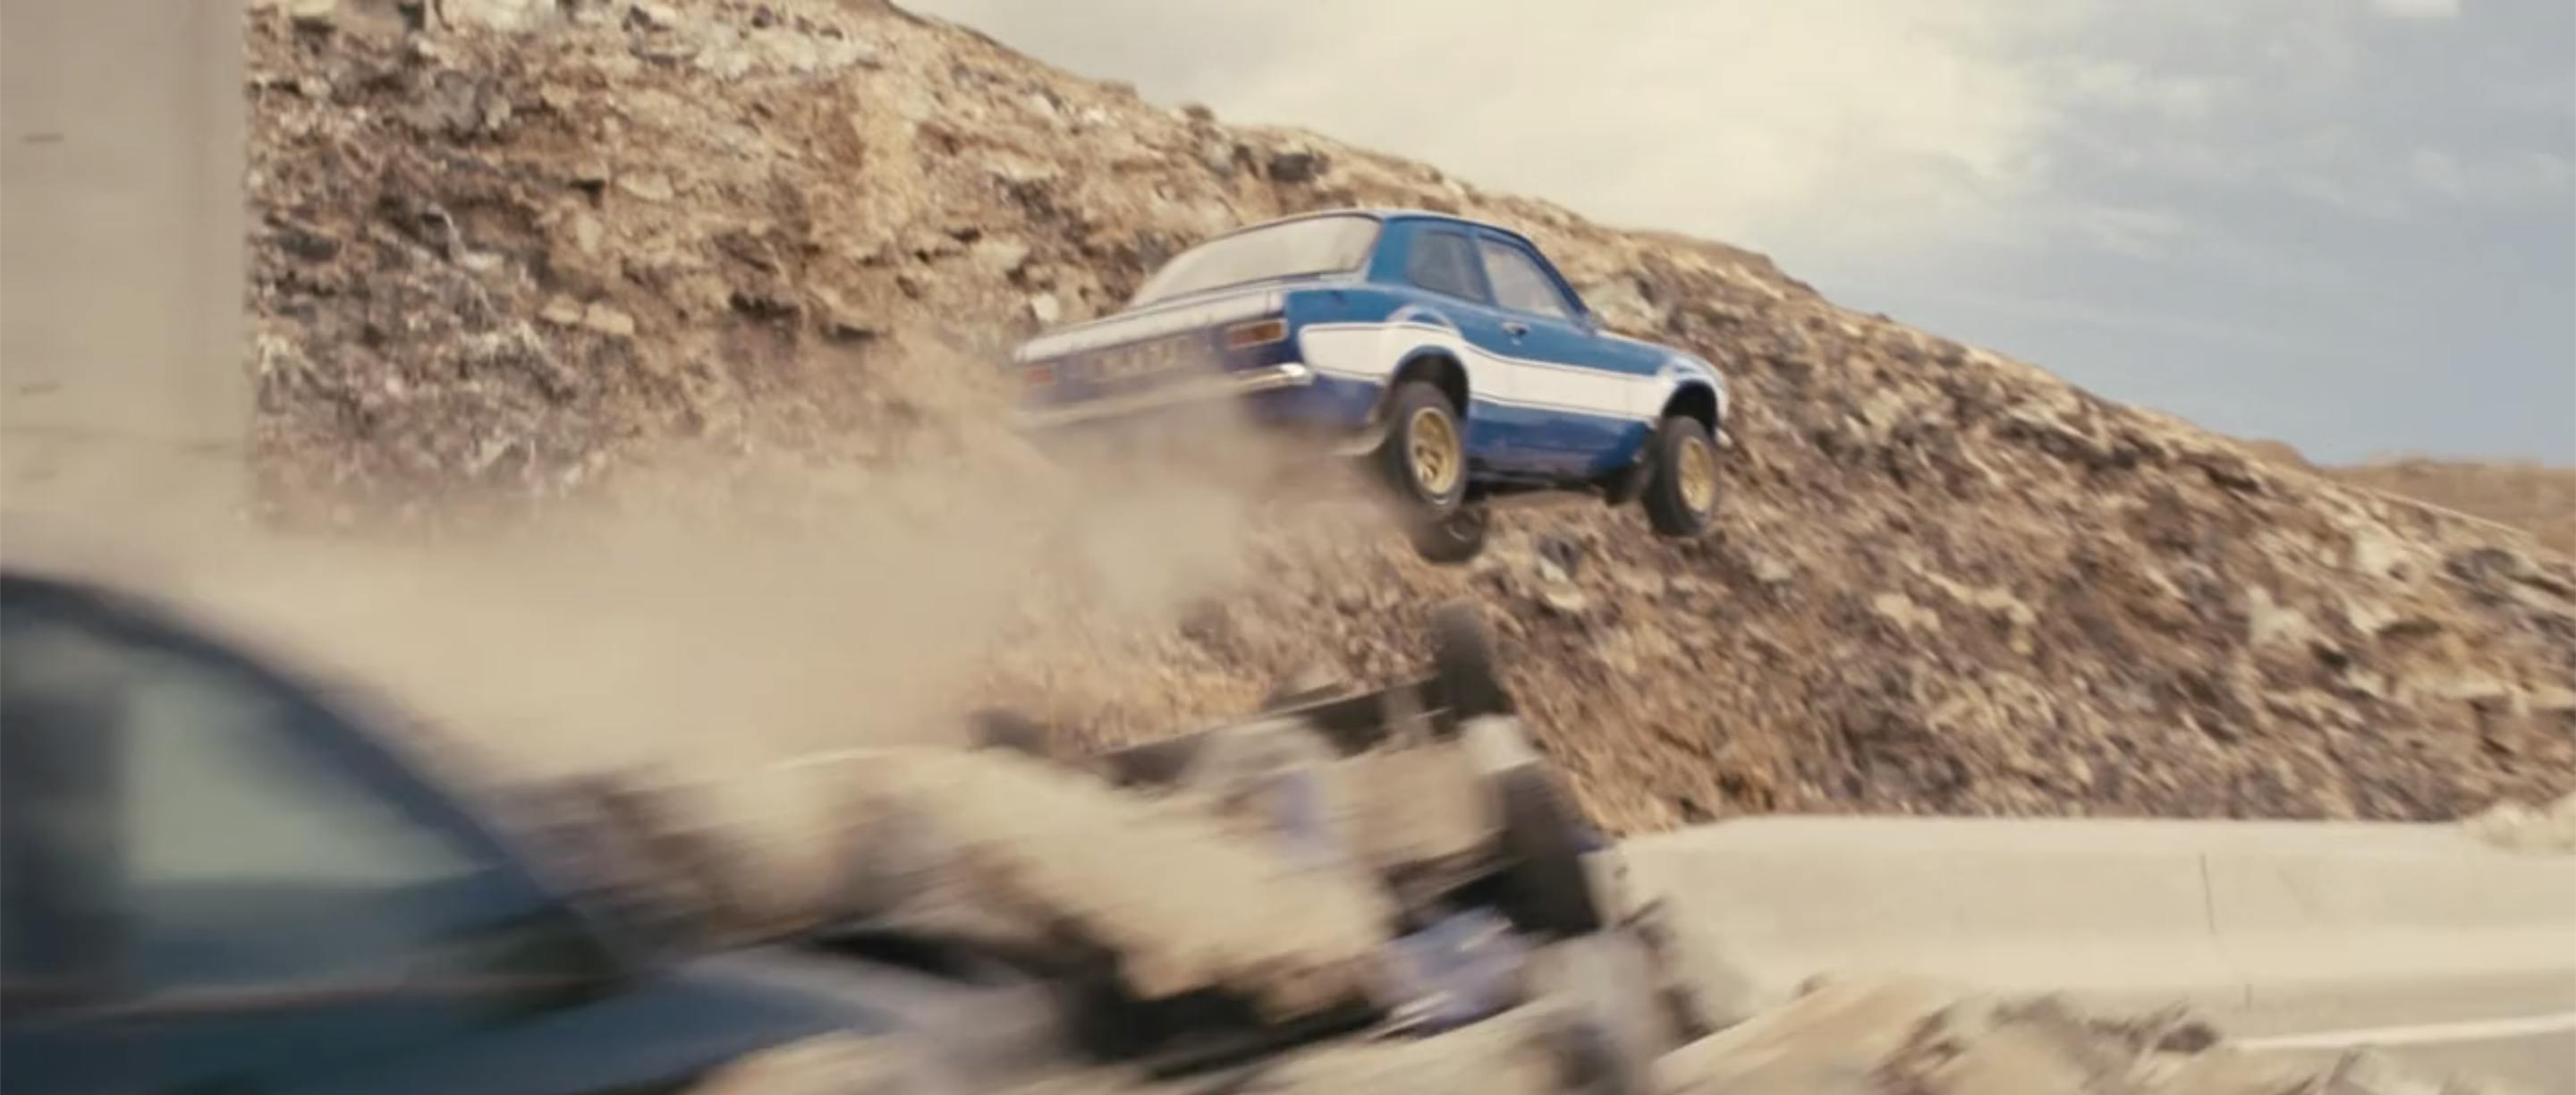 Here's How Many Cars Have Been Destroyed in the Fast & Furious Movies